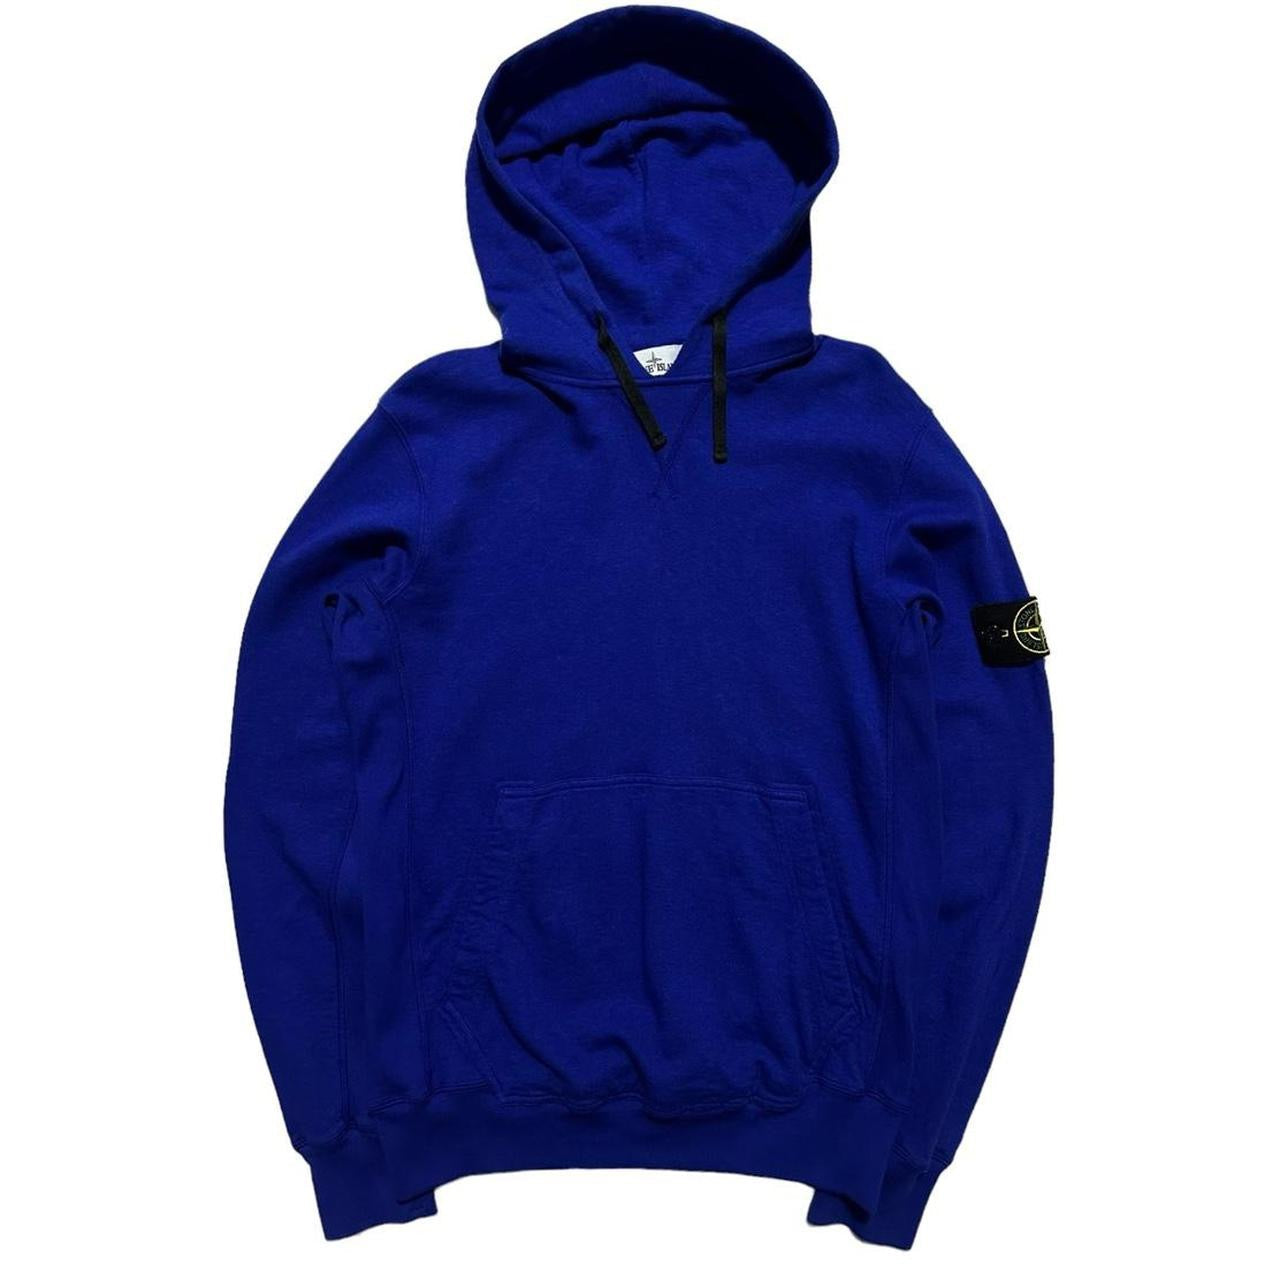 Stone Island Royal Blue Pullover Hoodie